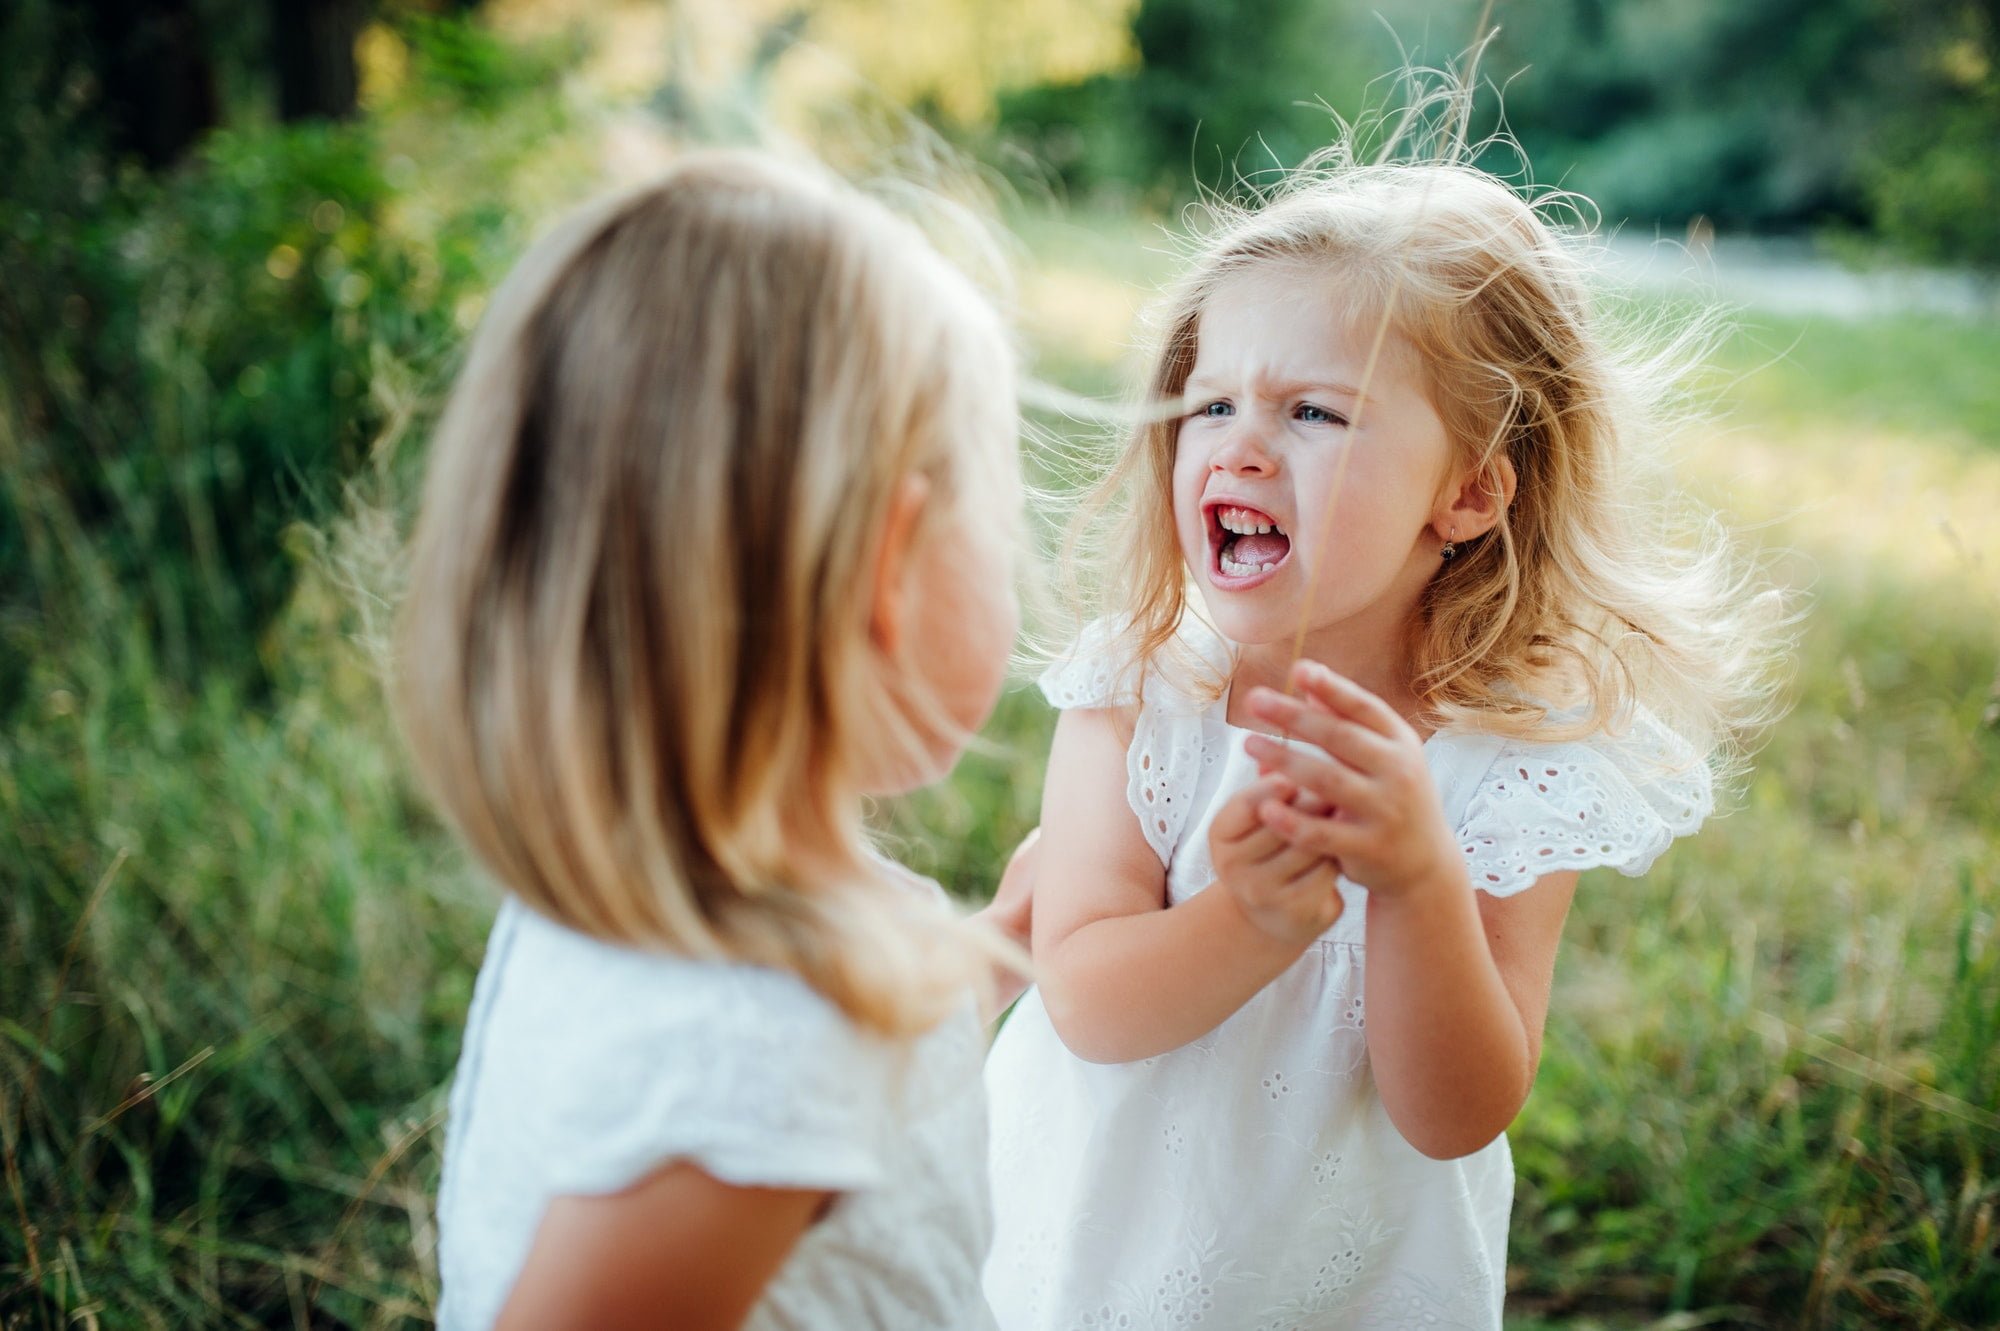 Two small angry girl friends or sister outdoors in sunny summer nature, arguing.